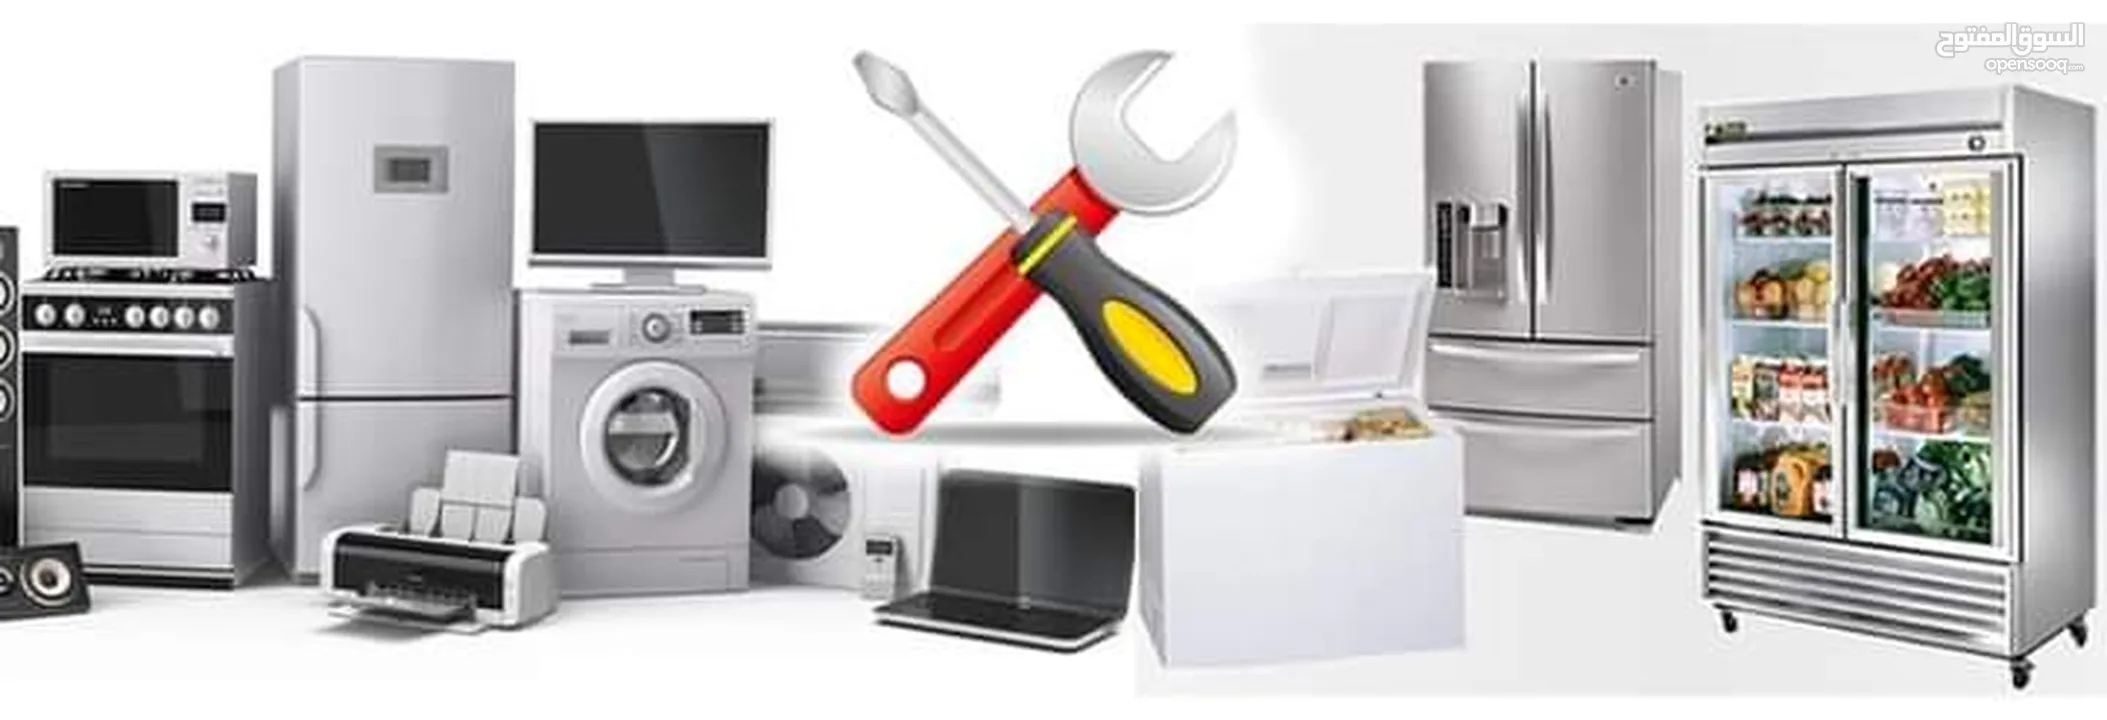 Air Conditioner & all home appliances repairing